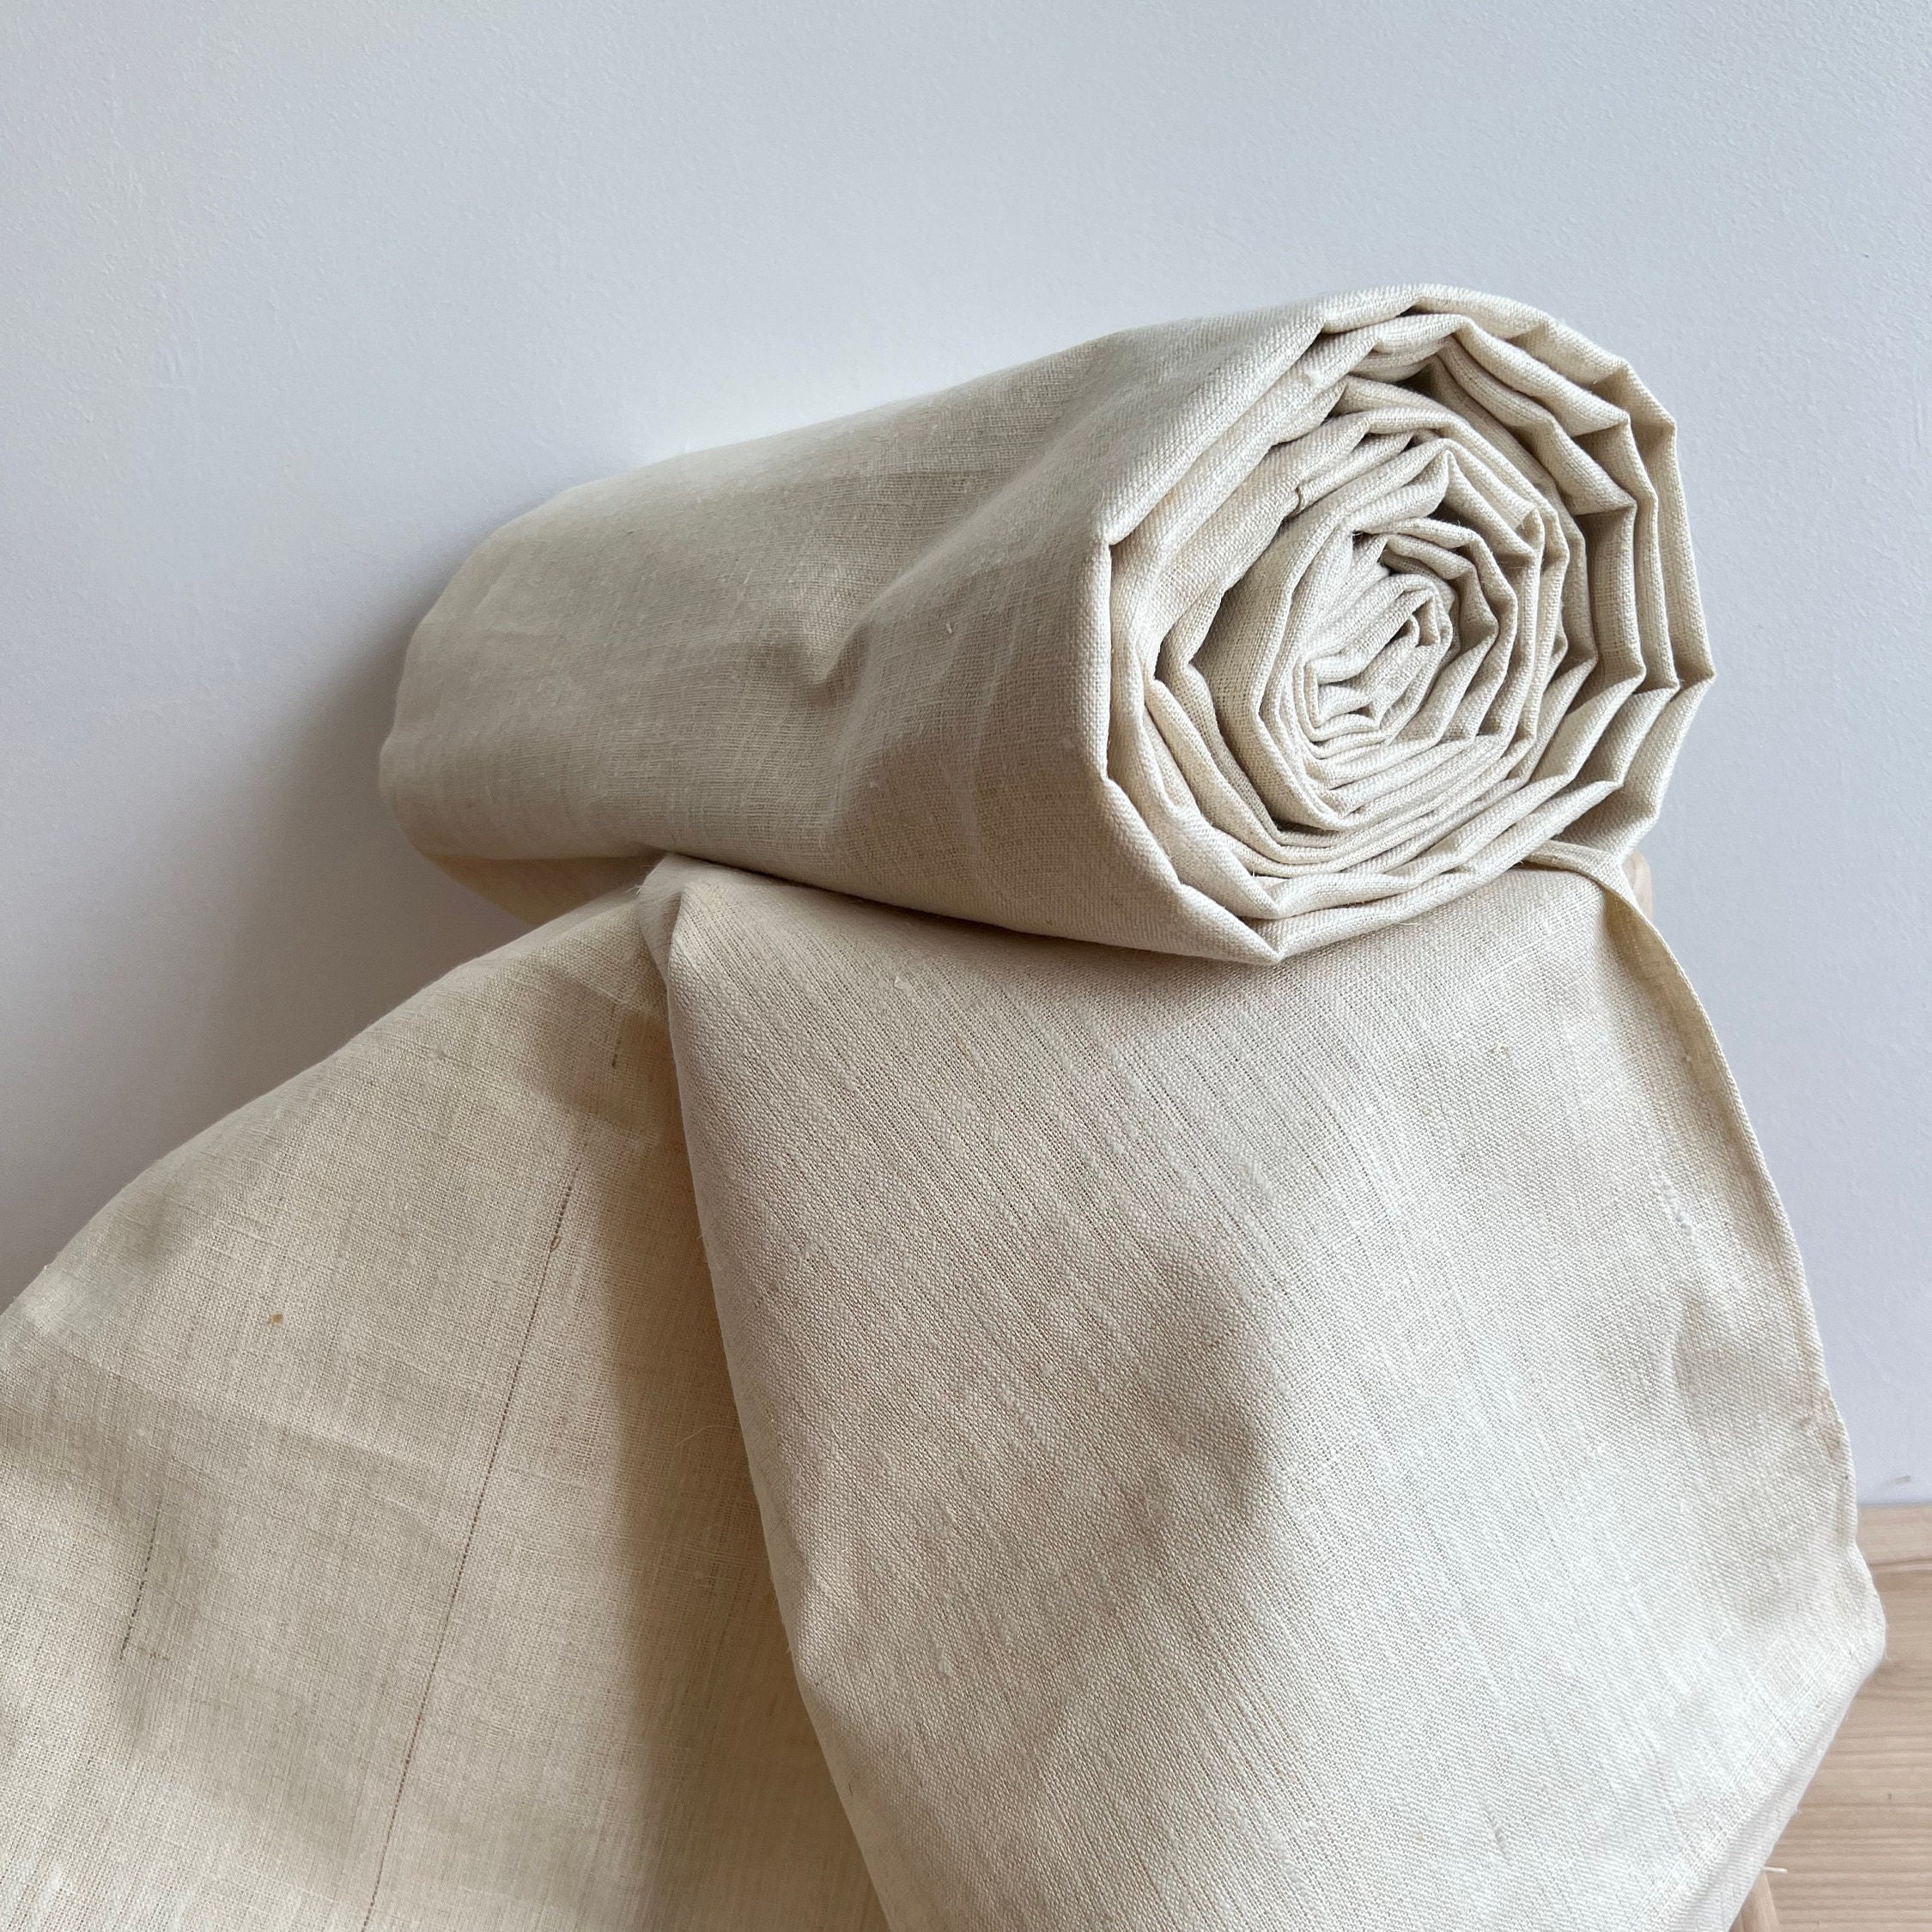 Softened White Linen Fabric, LIGHT WEIGHT Thin White Linen, 130 GSM, Washed  Linen Fabric by the Meter, Linen by the Yard, Linen for Clothes 